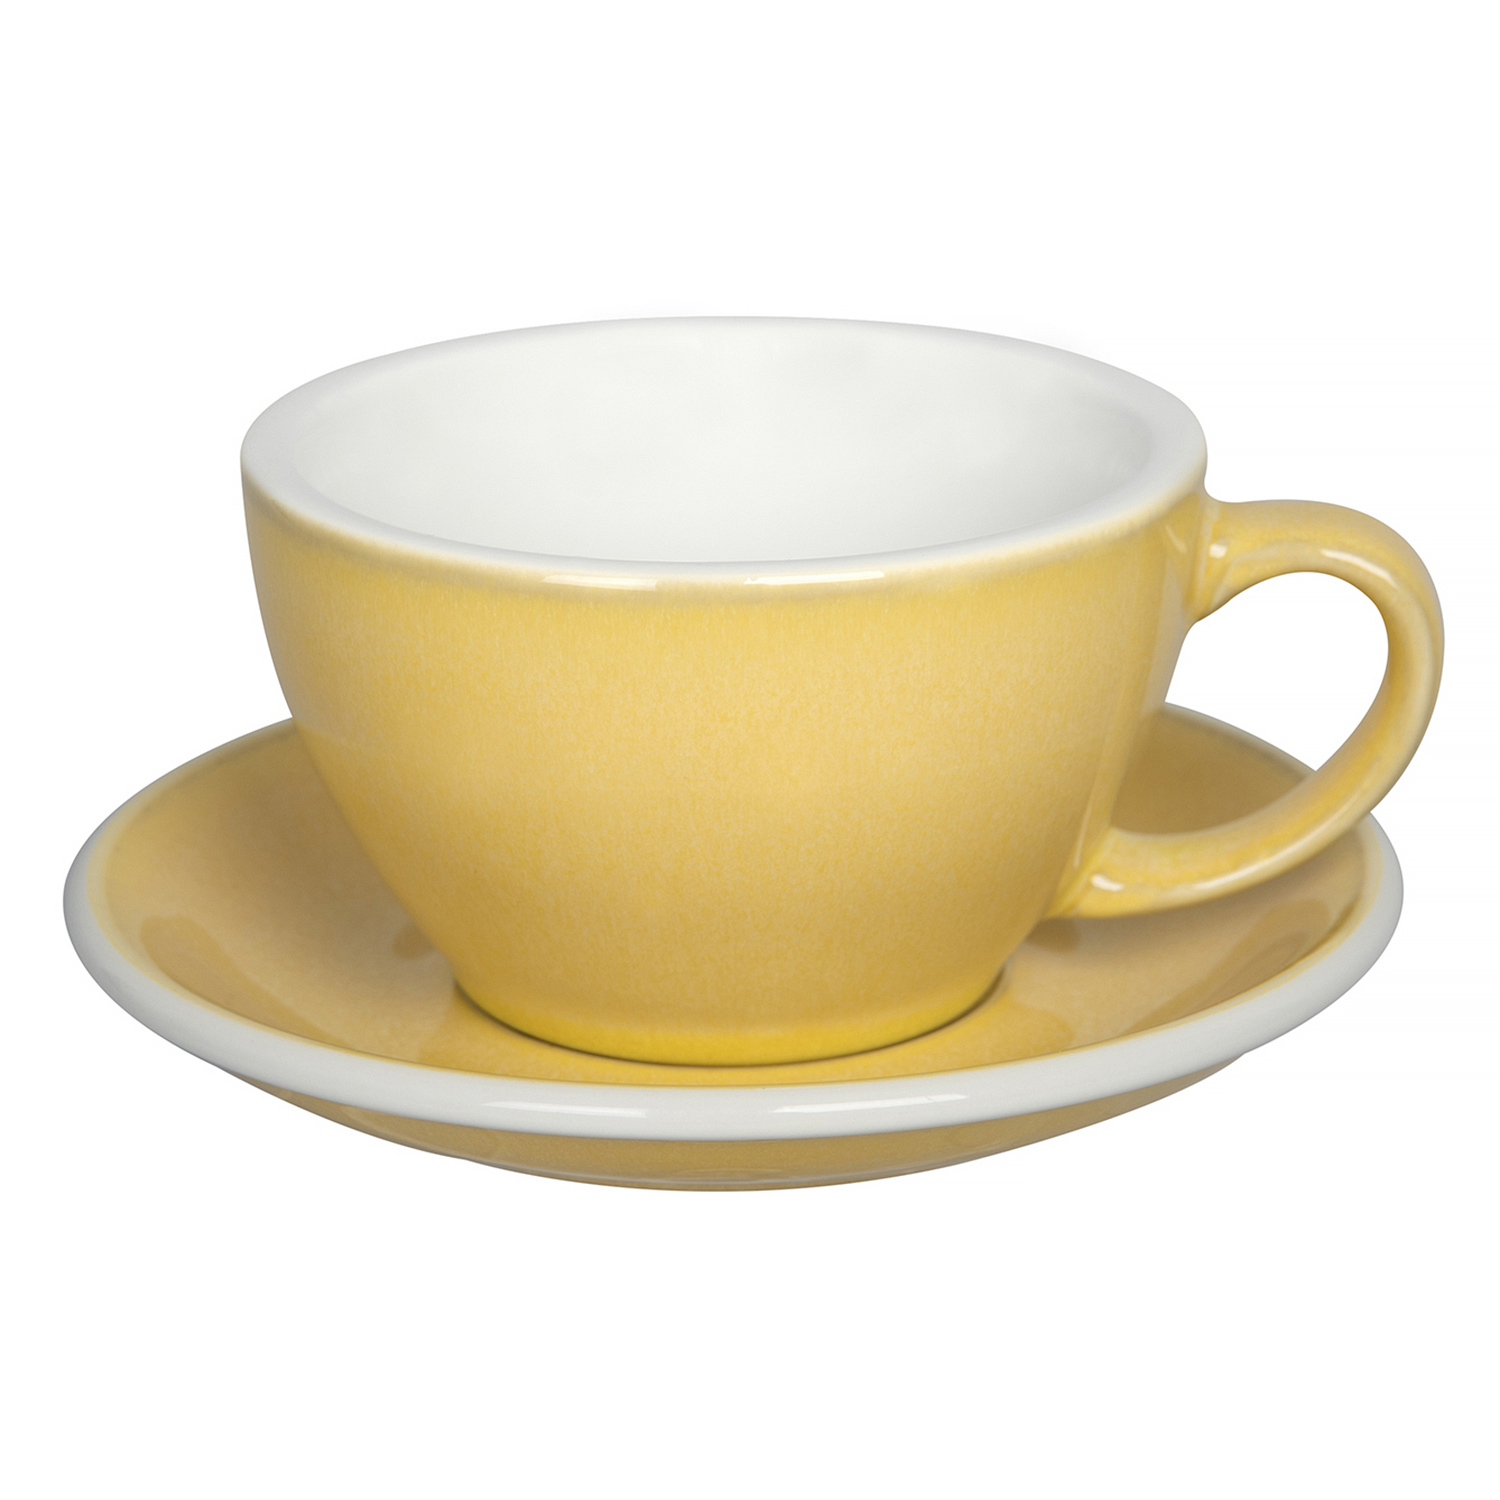 Loveramics Egg - Cafe Latte 300 ml Cup and Saucer  - Butter Cup